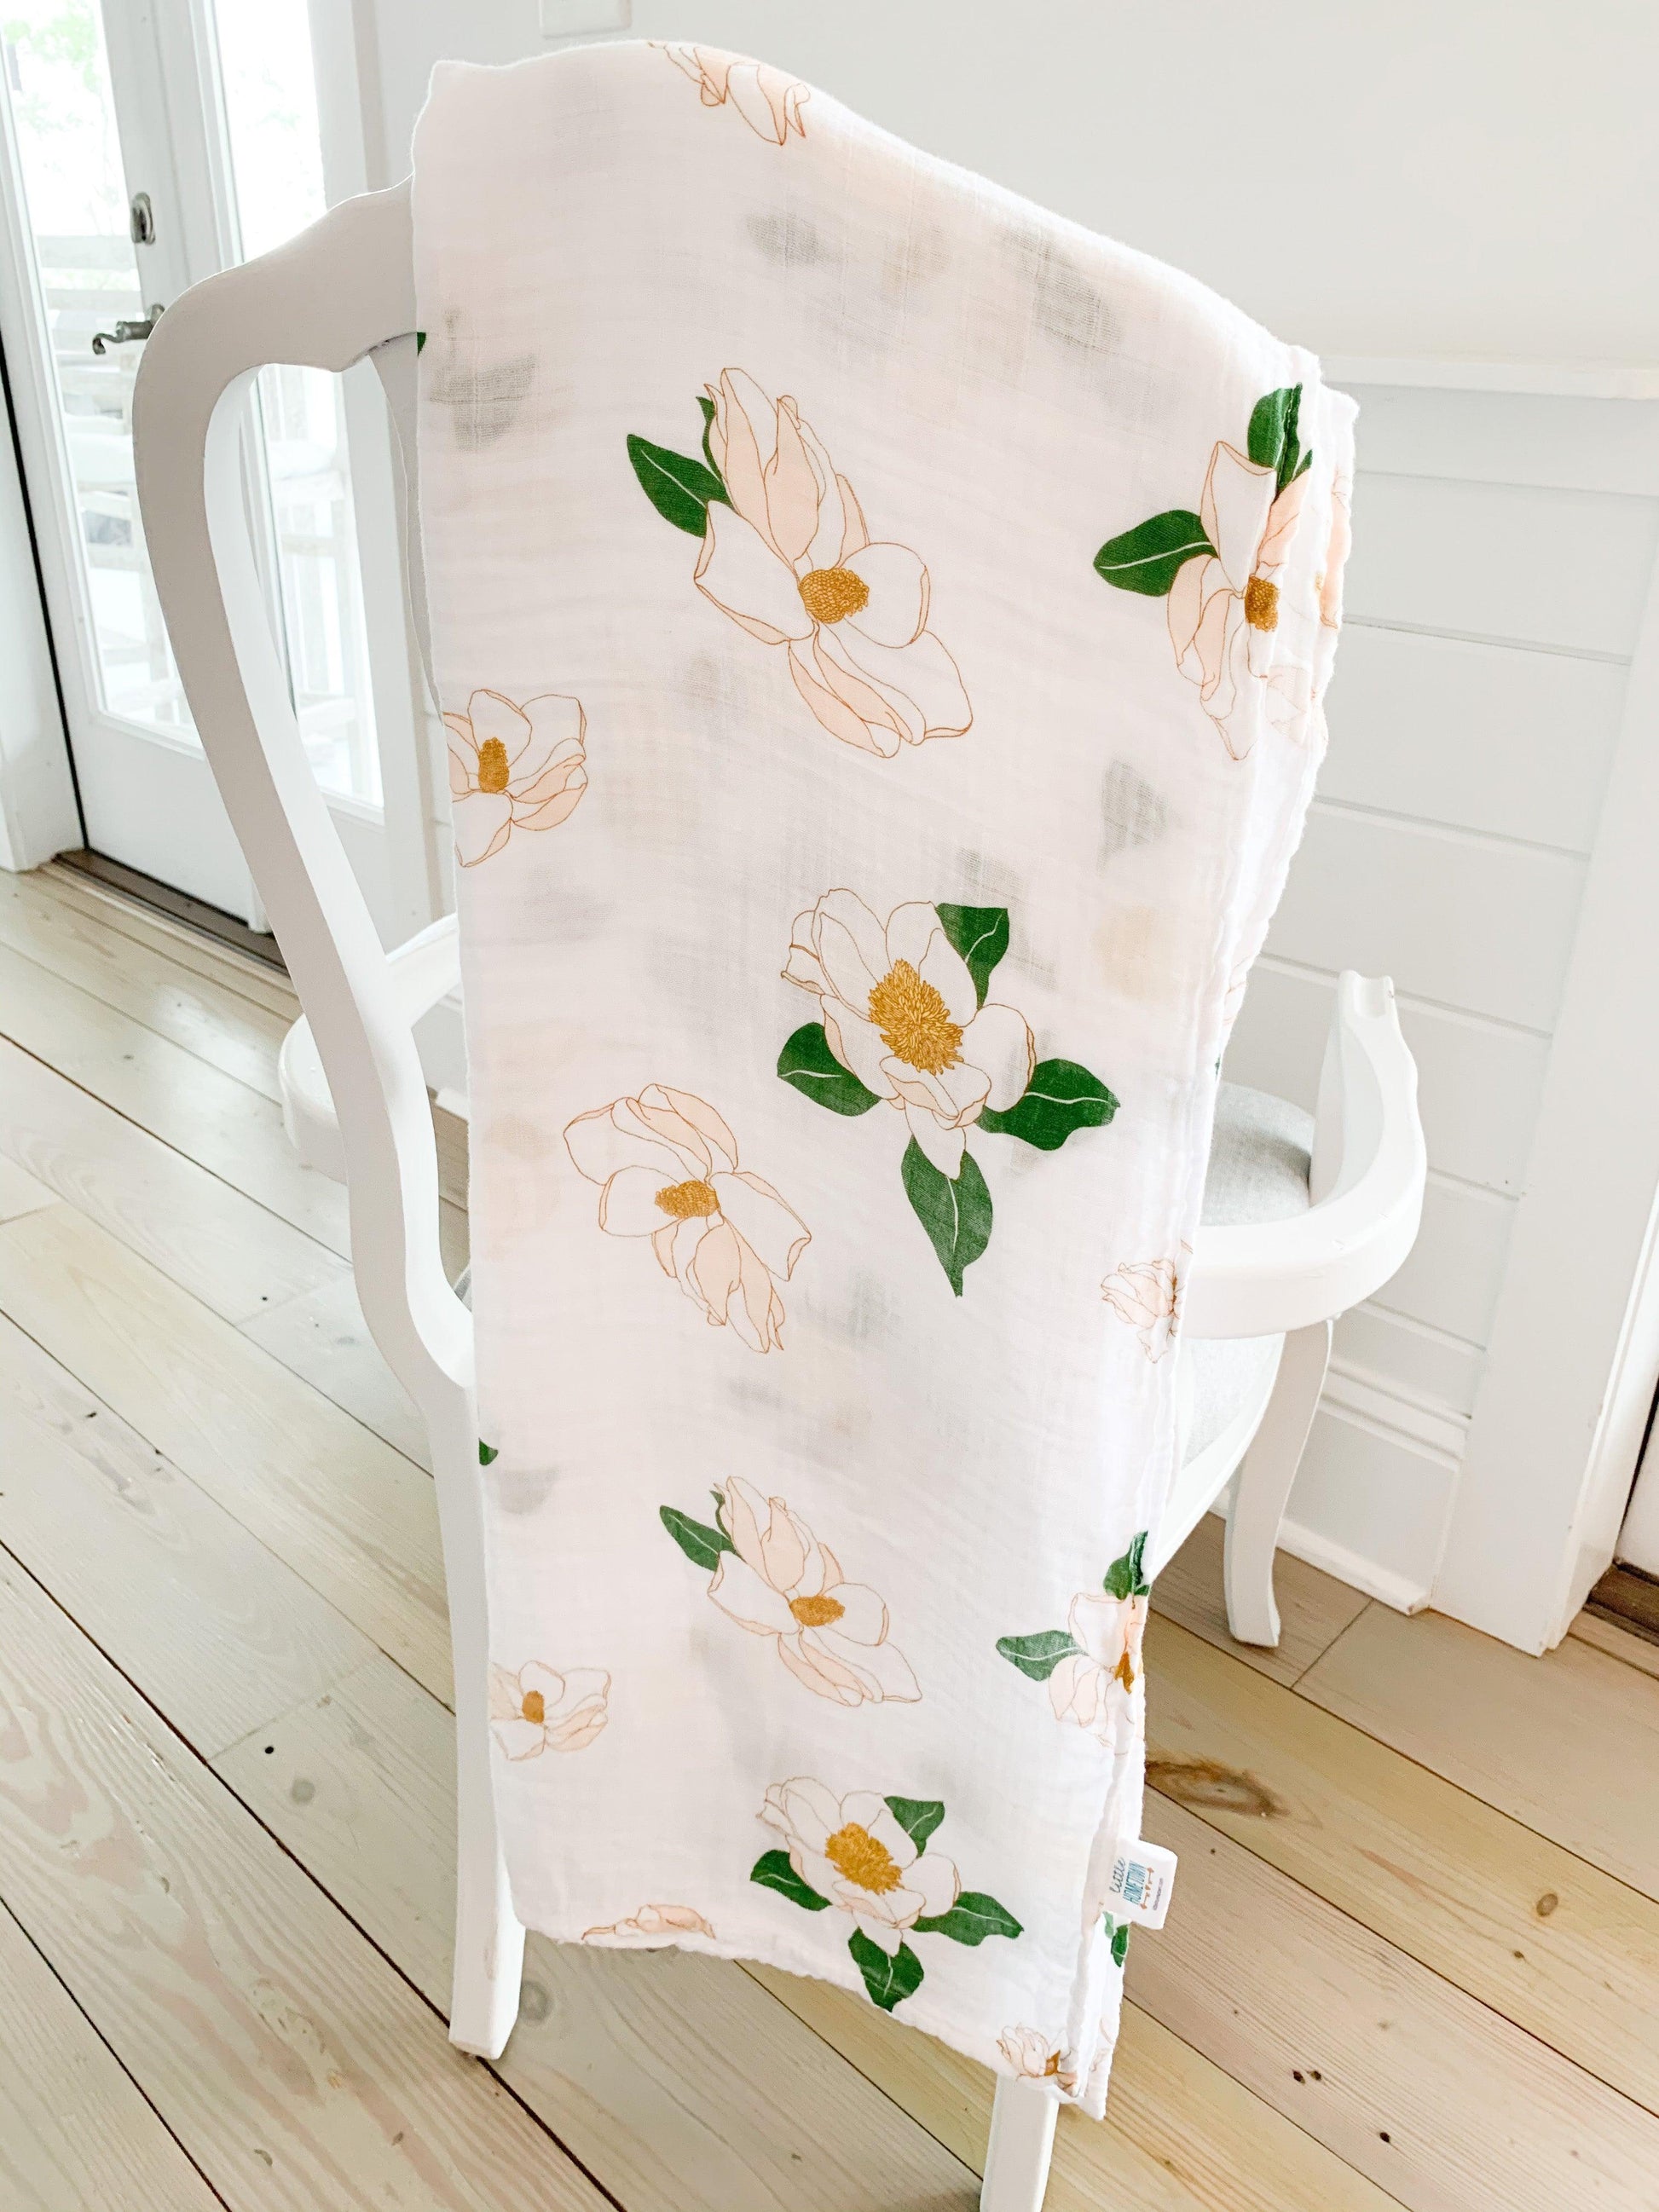 Southern Magnolia baby muslin swaddle blanket and burp cloth/bib combo, featuring delicate floral patterns.